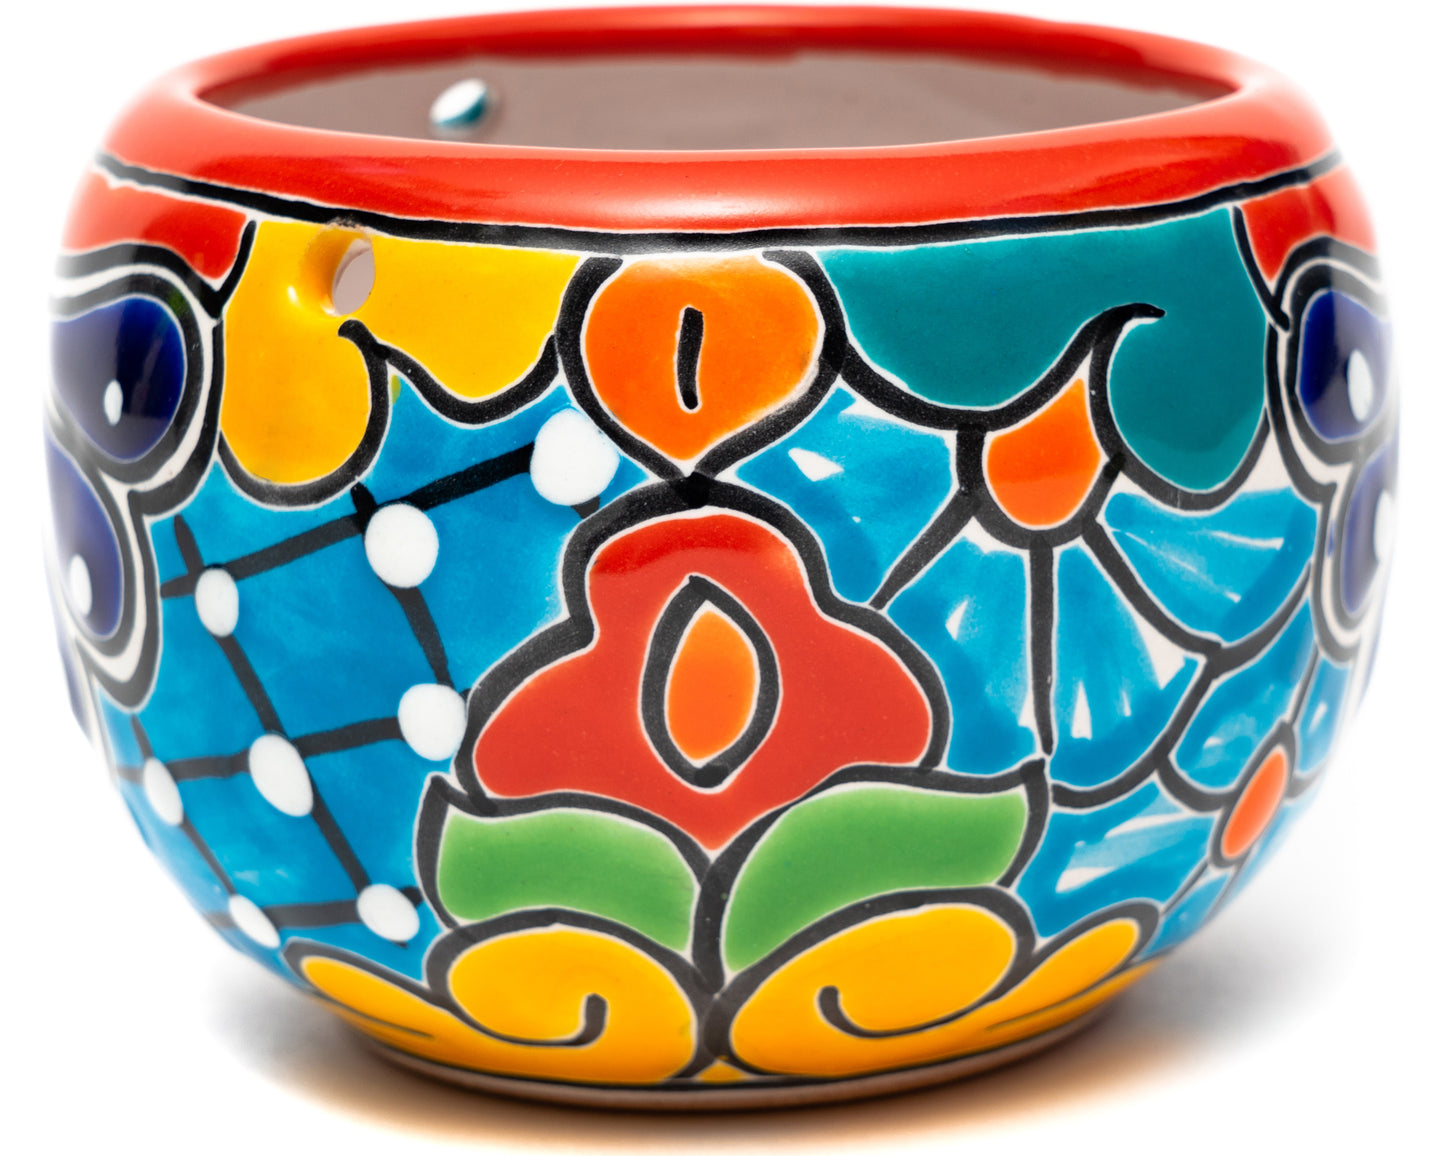 Bowl Planter - Small (1PC) - Red